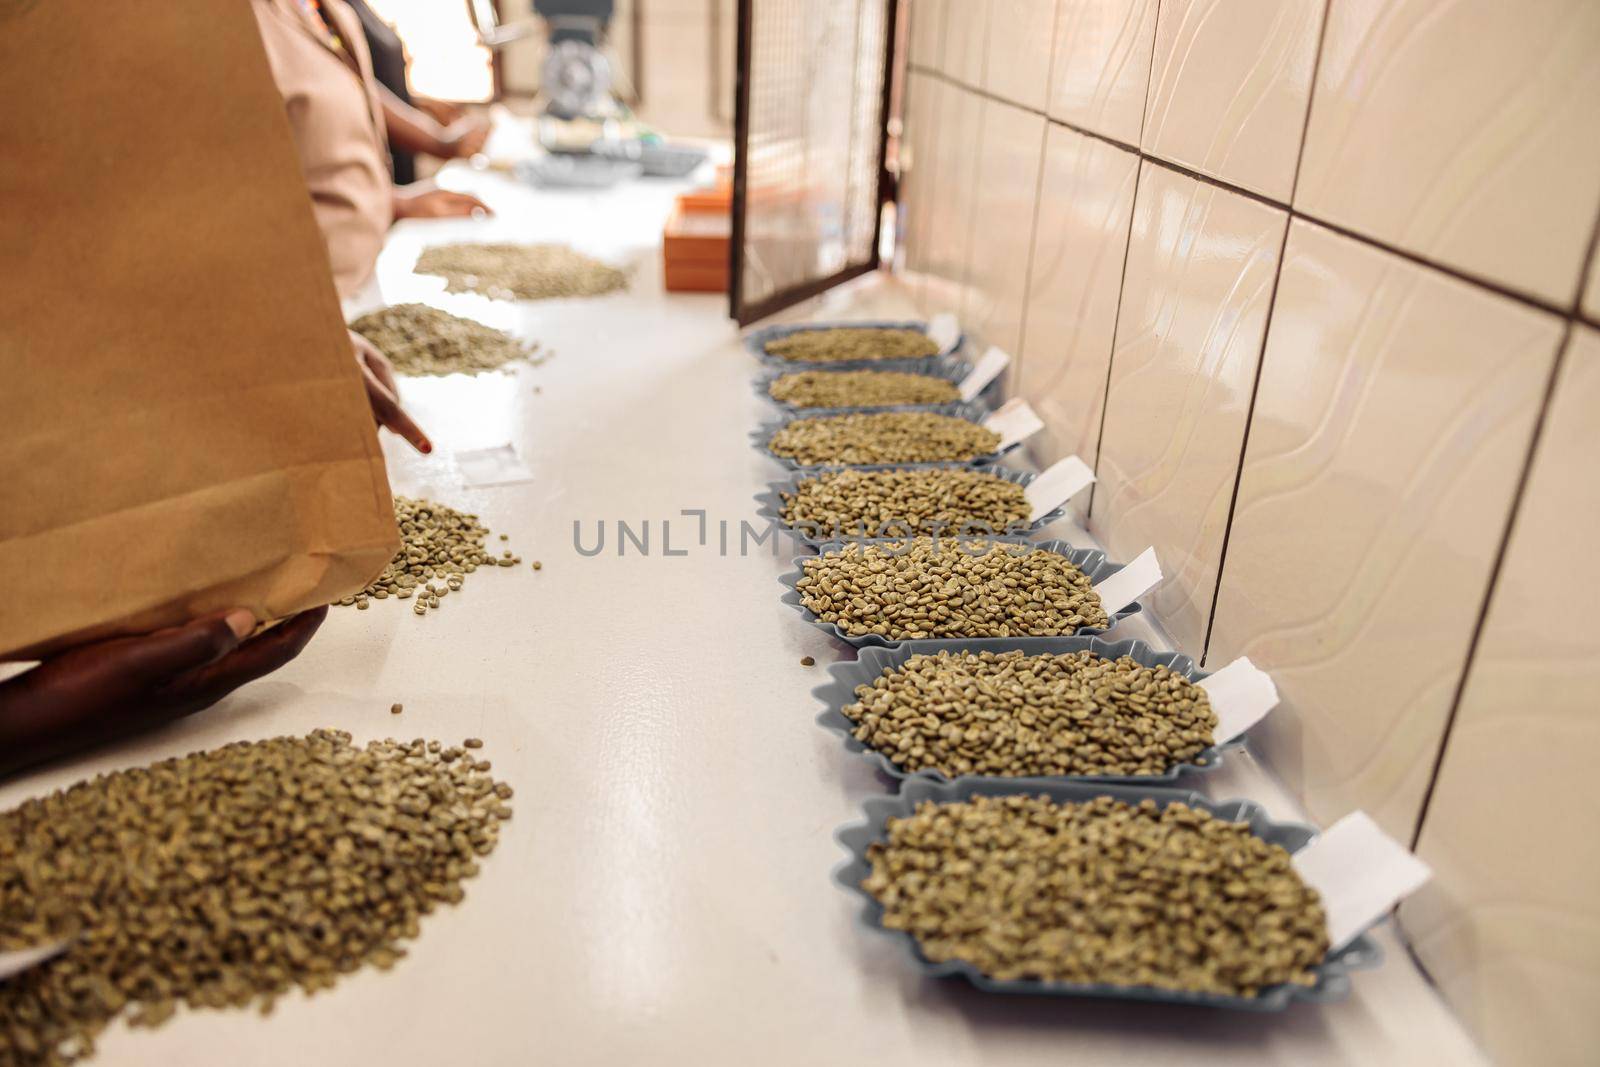 Cropped photo of workers sorting different types of coffee beans into paper bags